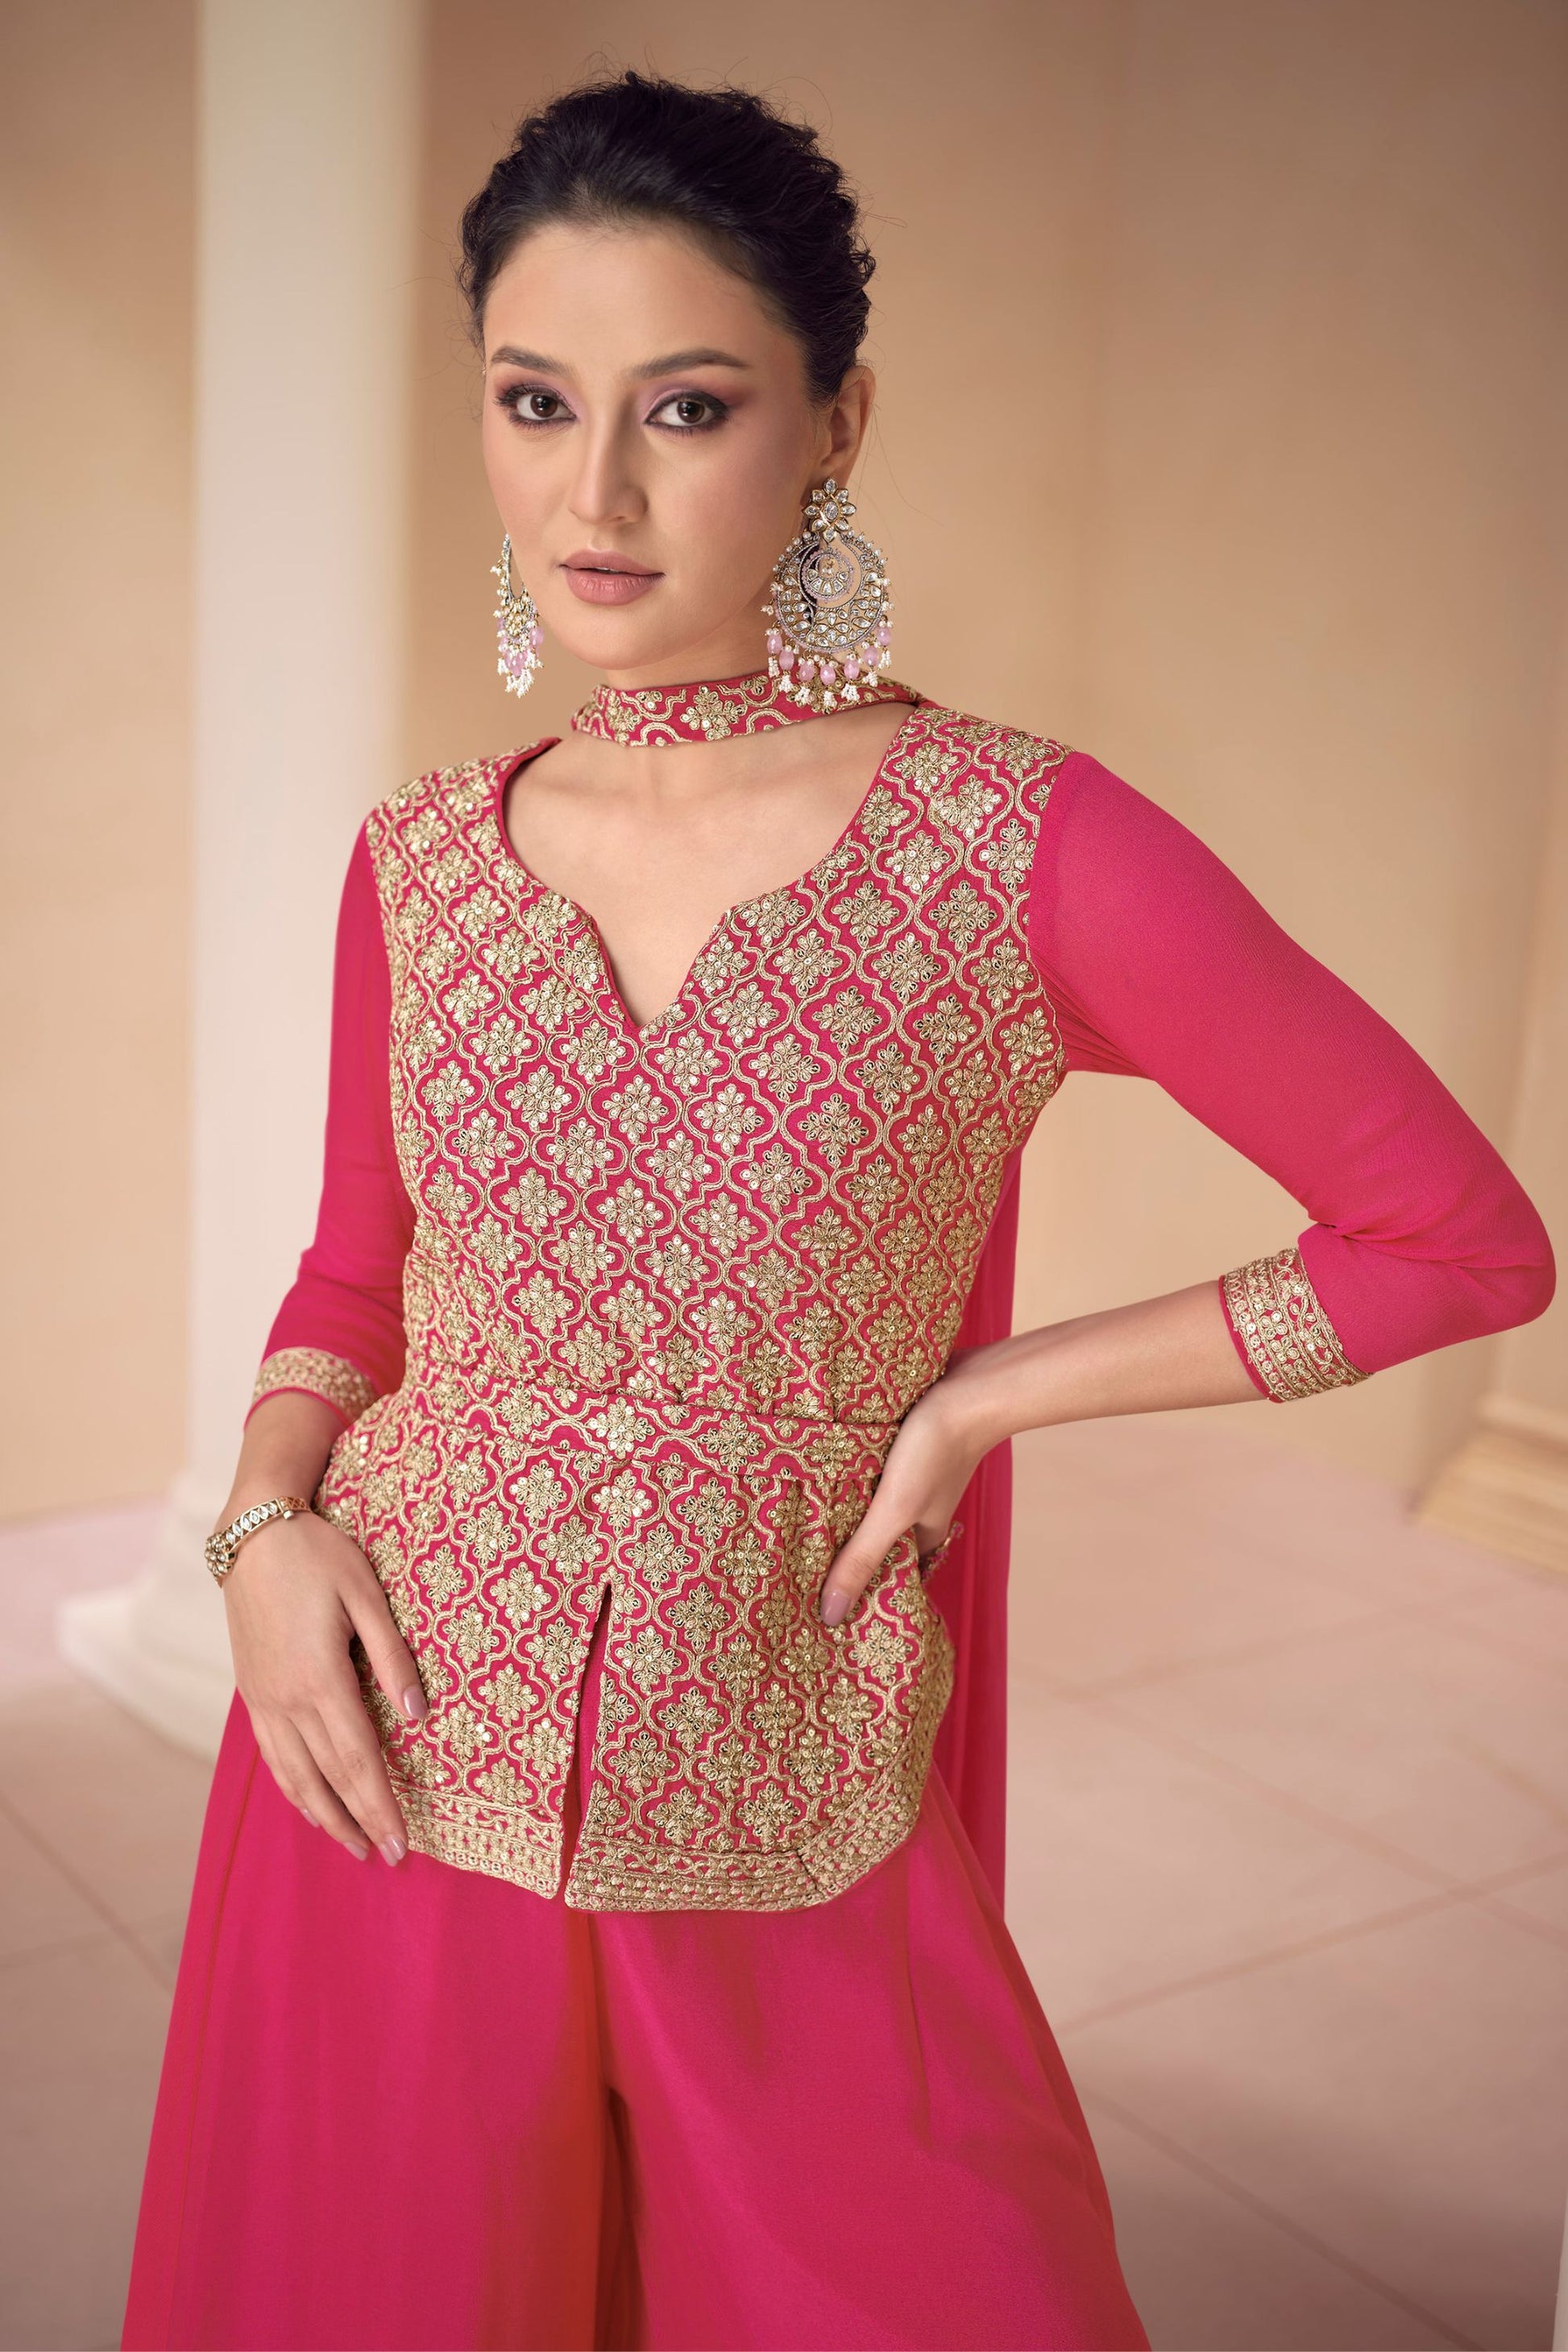 Pink Georgette Plazo Suit For Indian Festivals & Pakistani Weddings - Embroidery Work